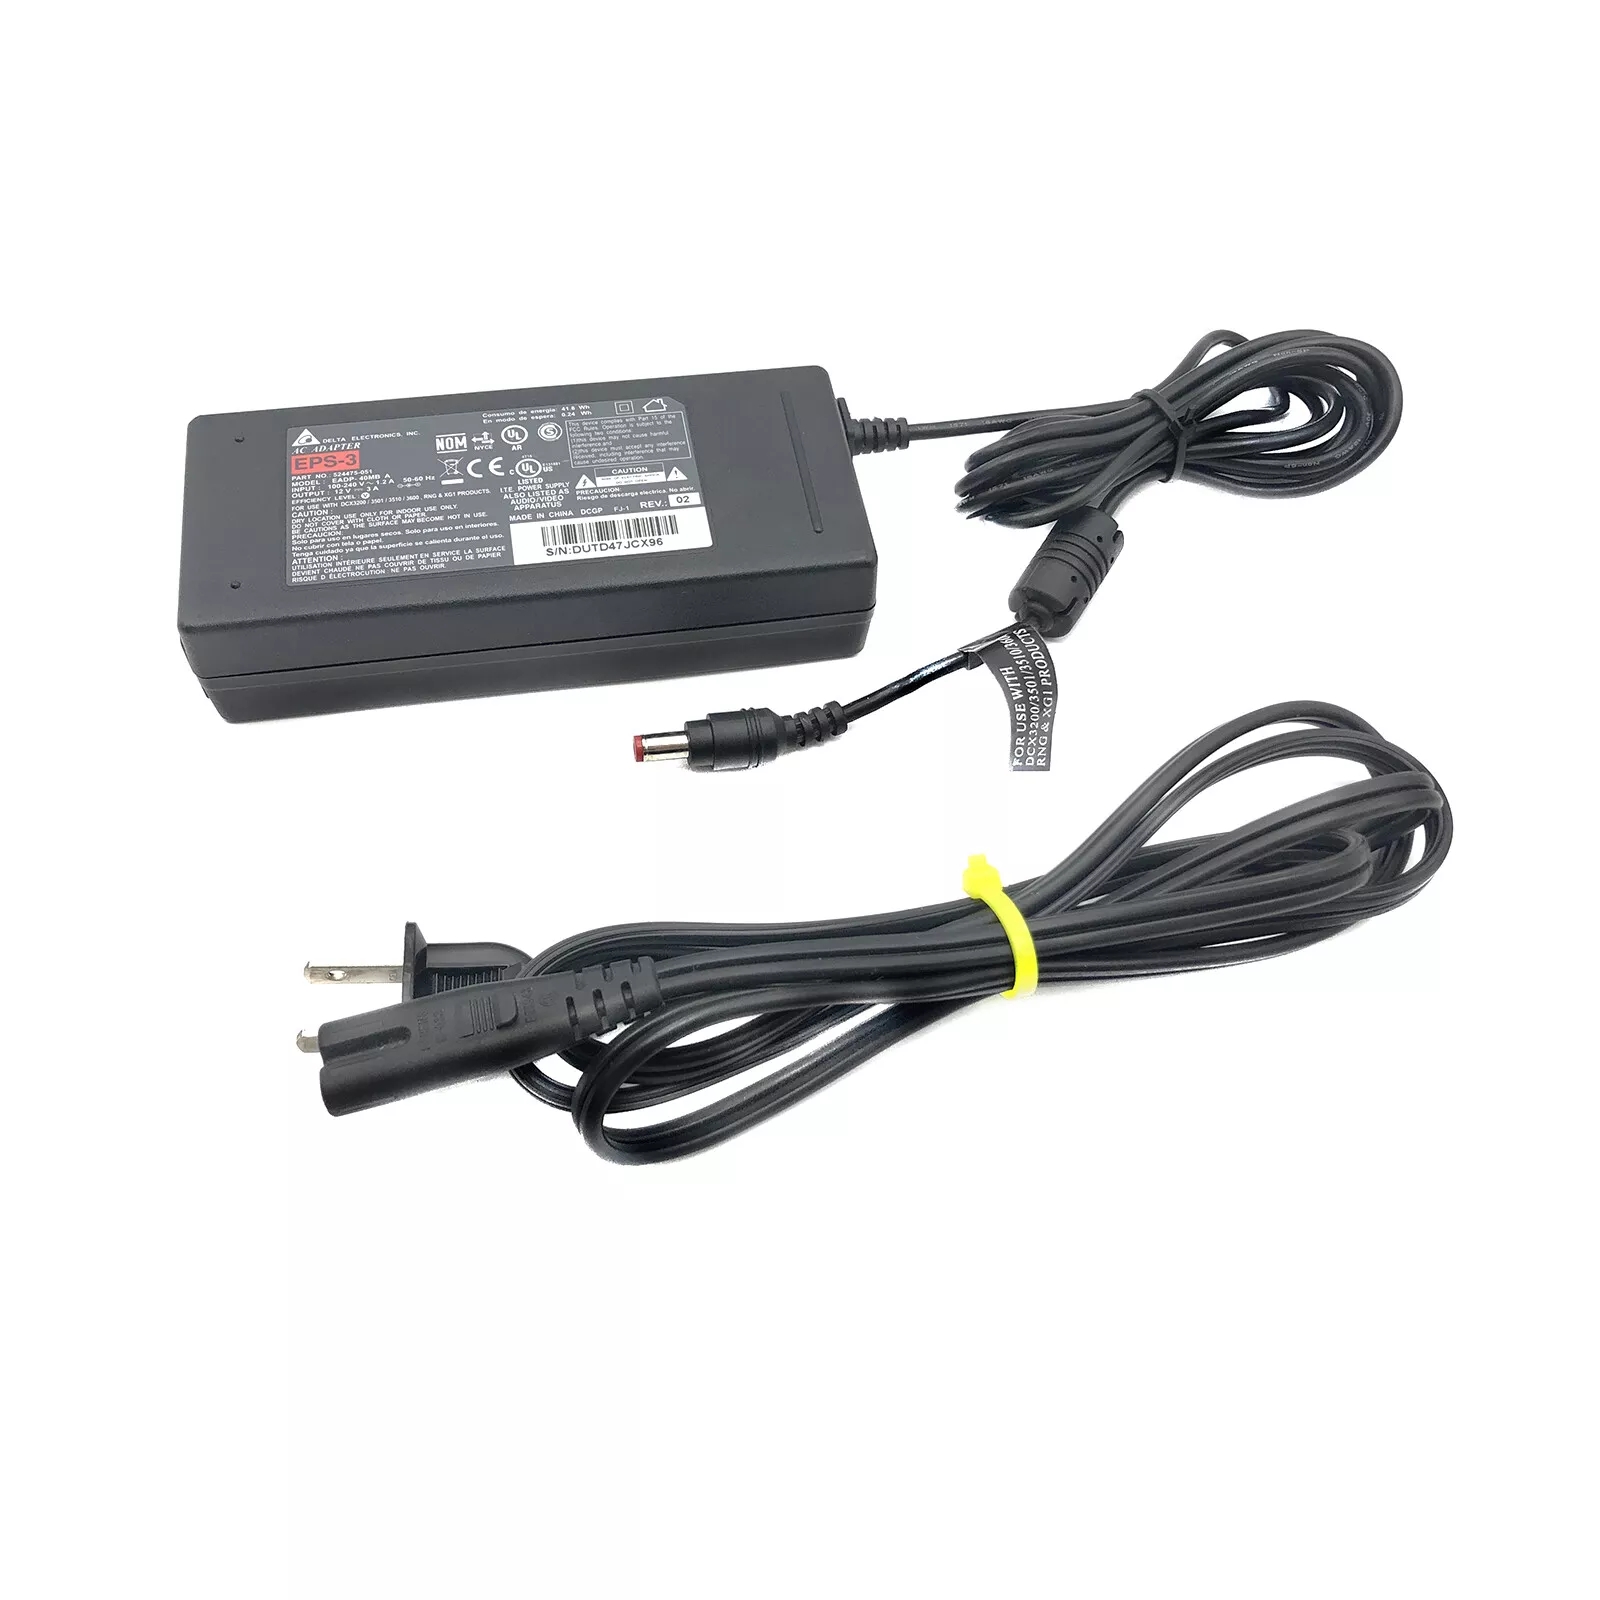 *Brand NEW*Genuine Delta 524475-051 EADP-40MB A 12V 3A AC Adapter Power Supply - Click Image to Close